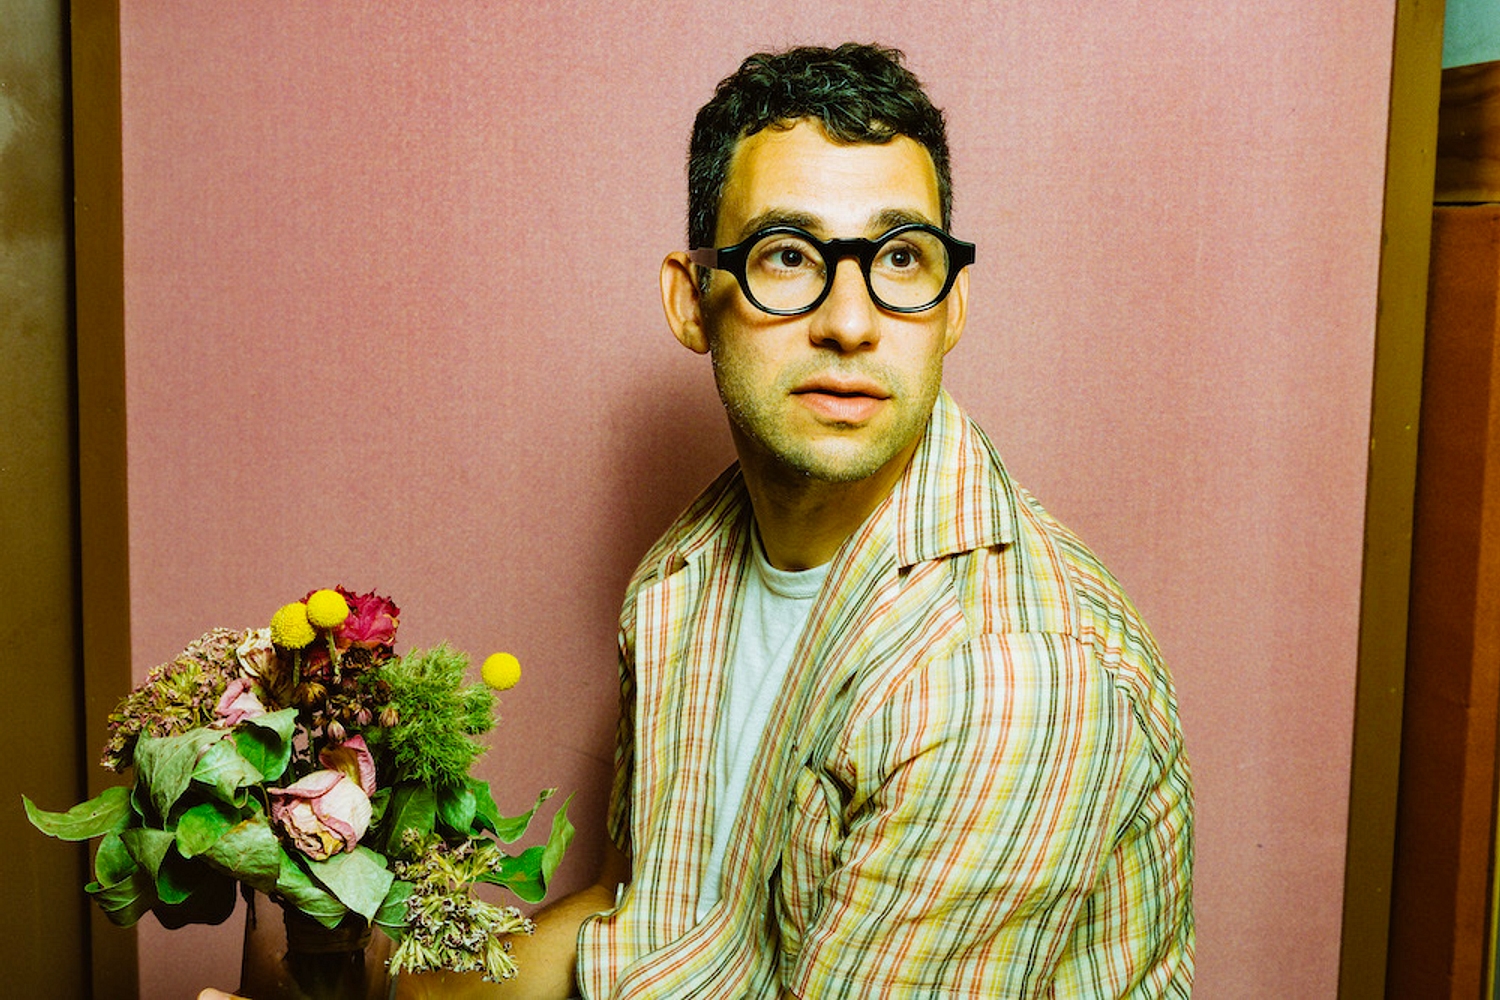 A new Bleachers album is coming “this year”